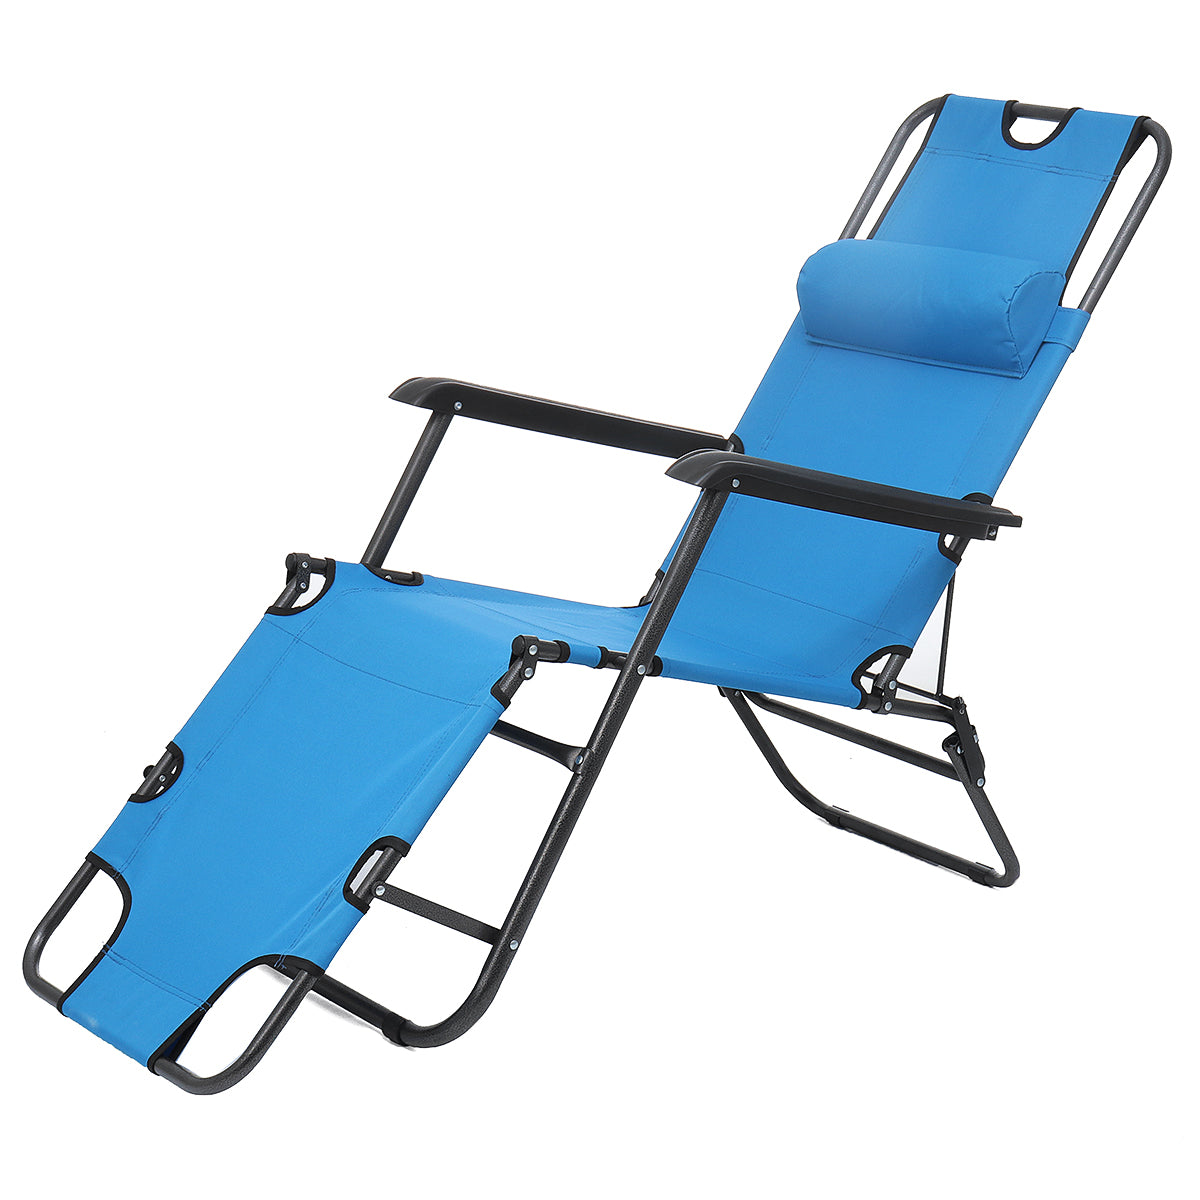 Portable Folding Sun Loungers Single Sofa Bed Office Noon Break Nap Leisure Bed Comfortable Beach Chaise Outdoor Camping Patio Lawn